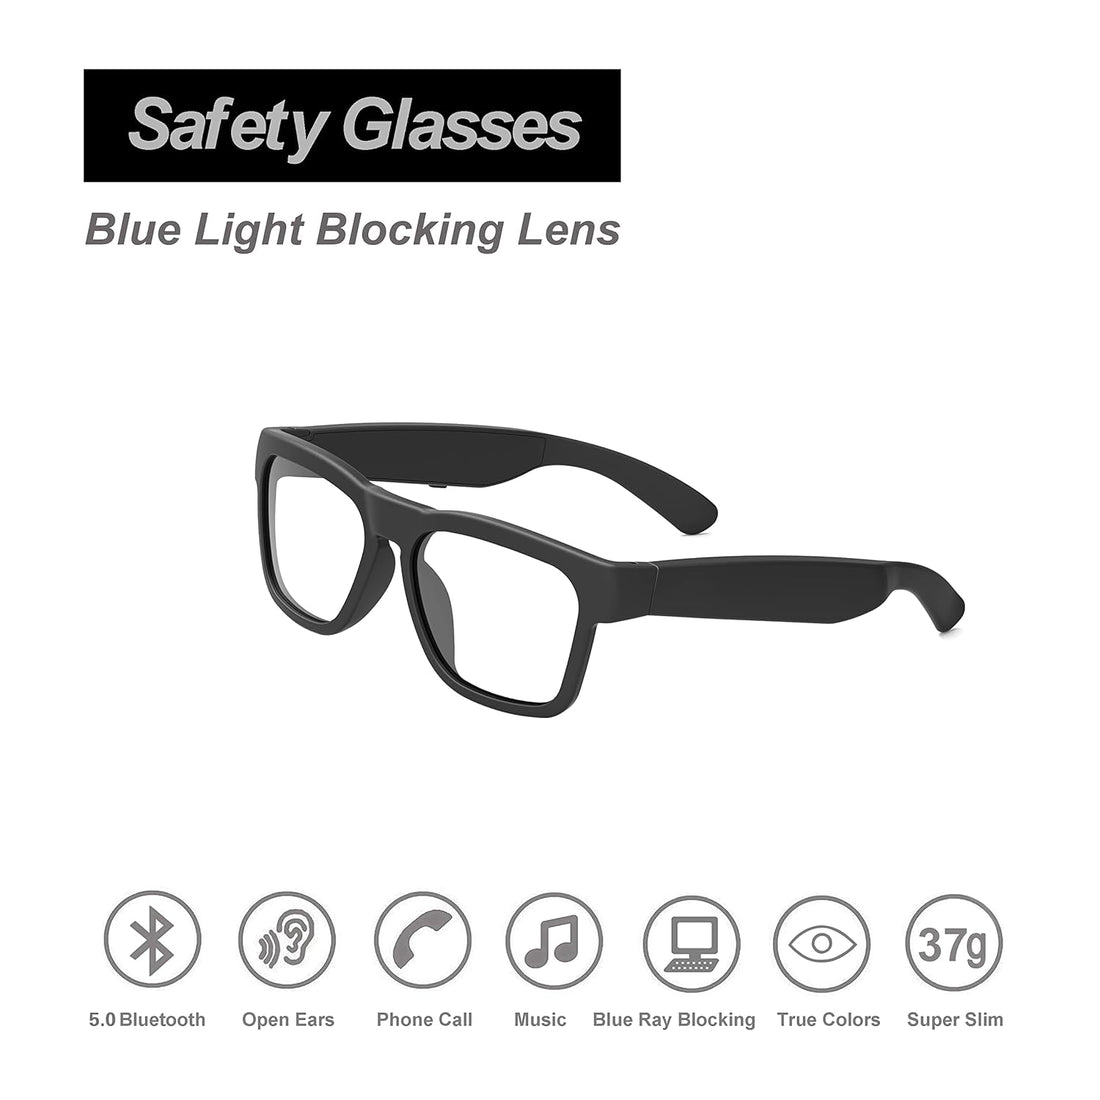 OhO Bluetooth Glasses,Voice Control and Open Ear Style Smart Glasses Listen Music and Calls with Volume UP and Down,Audio Glasses with Blue Light Blocking Healthy Lens for Gaming,Reading and Computer